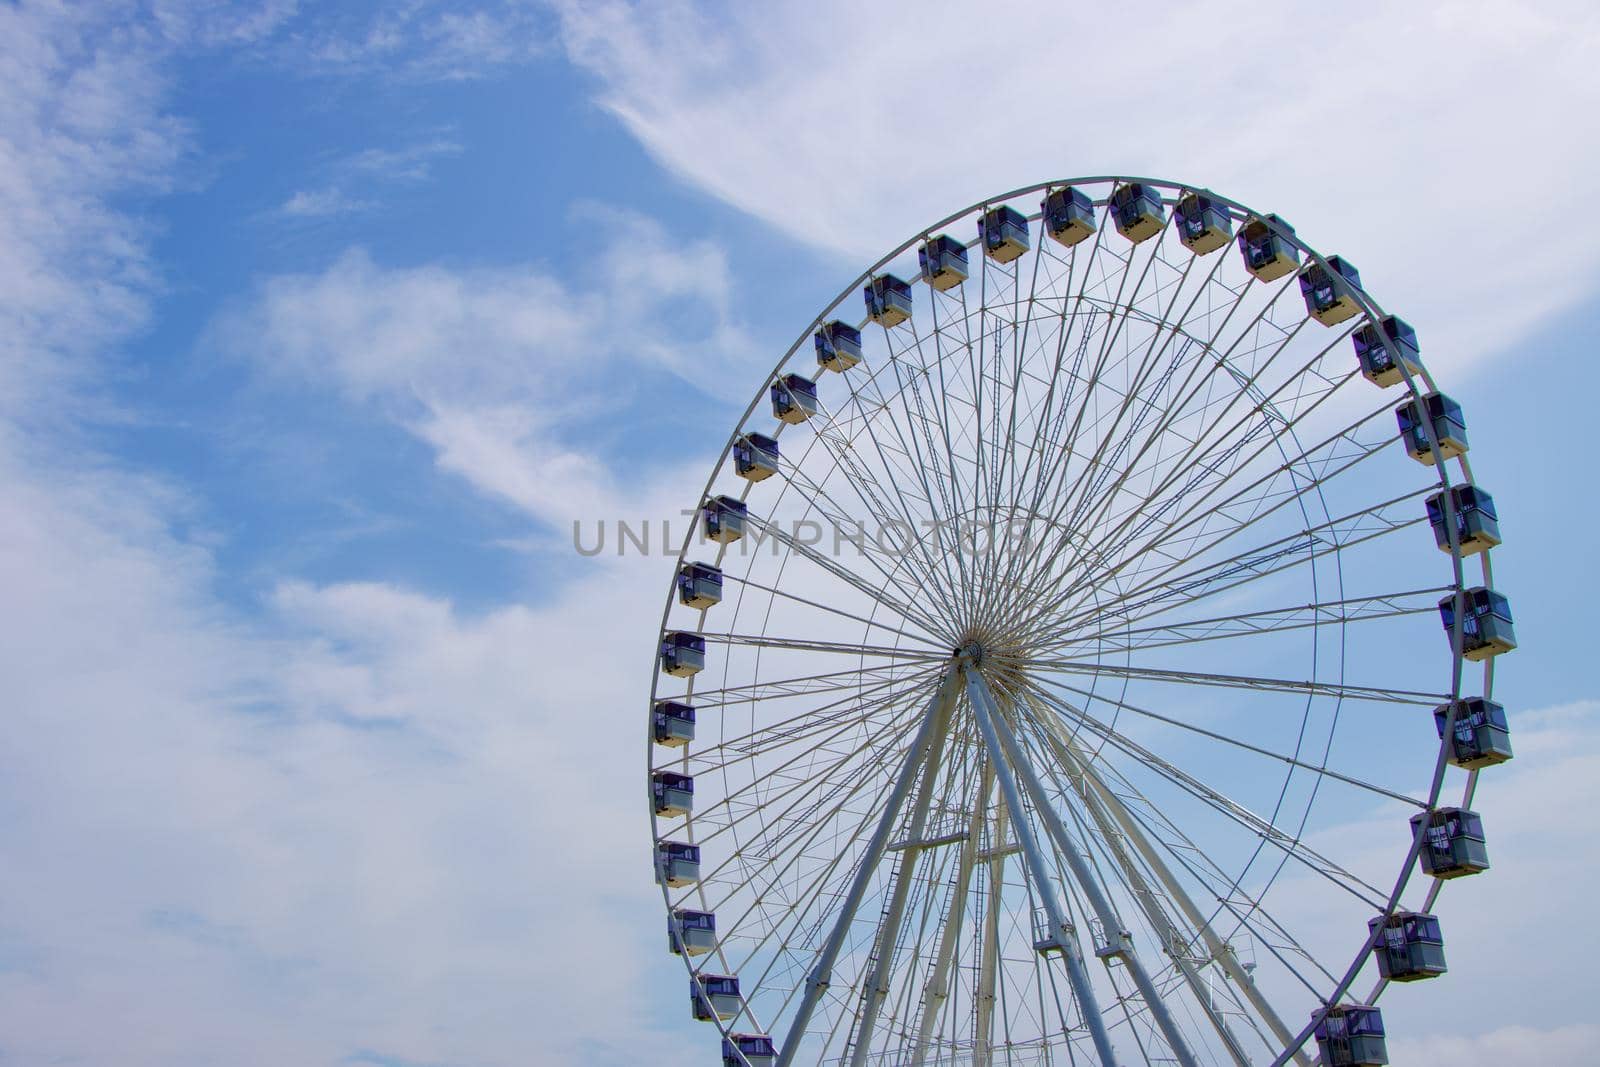 Great Yarmouth Observation Wheel with blue sky and clouds by StefanMal